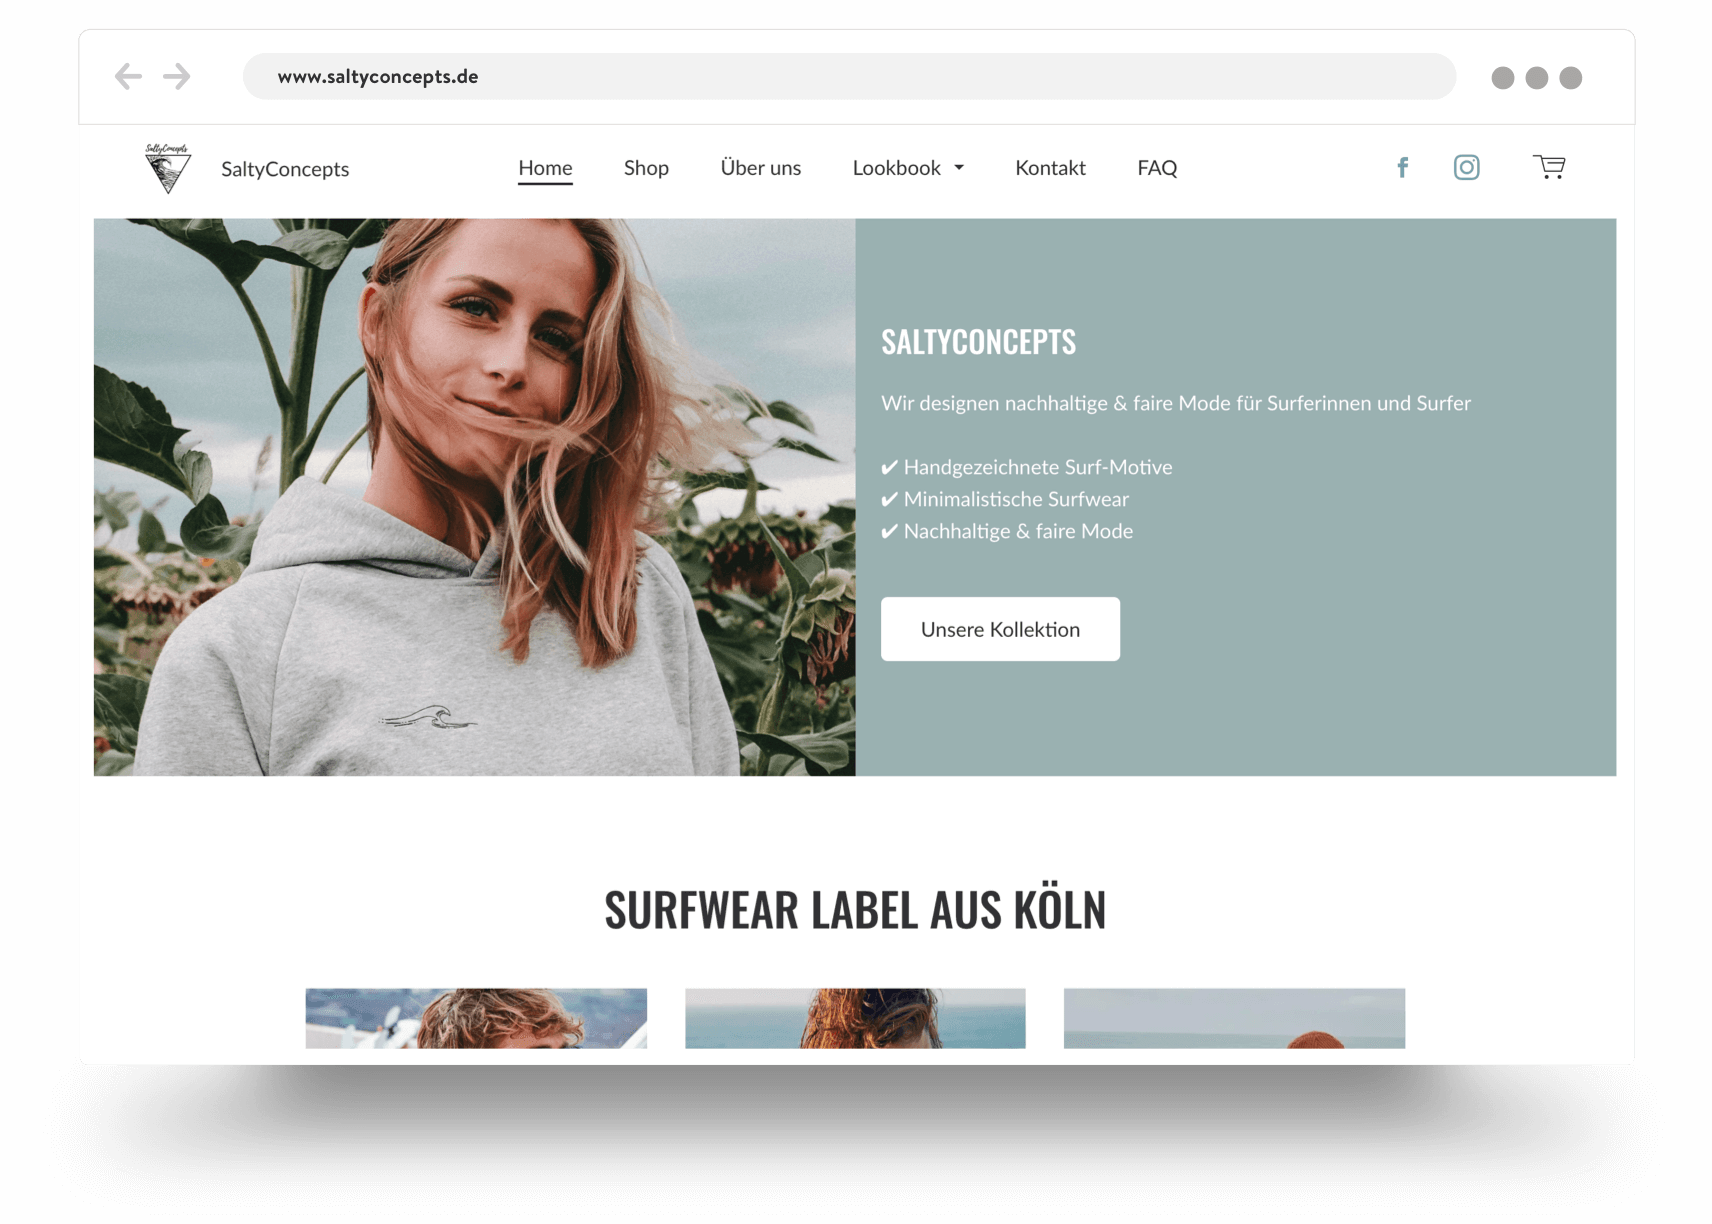 Online store selling sustainable surfwear